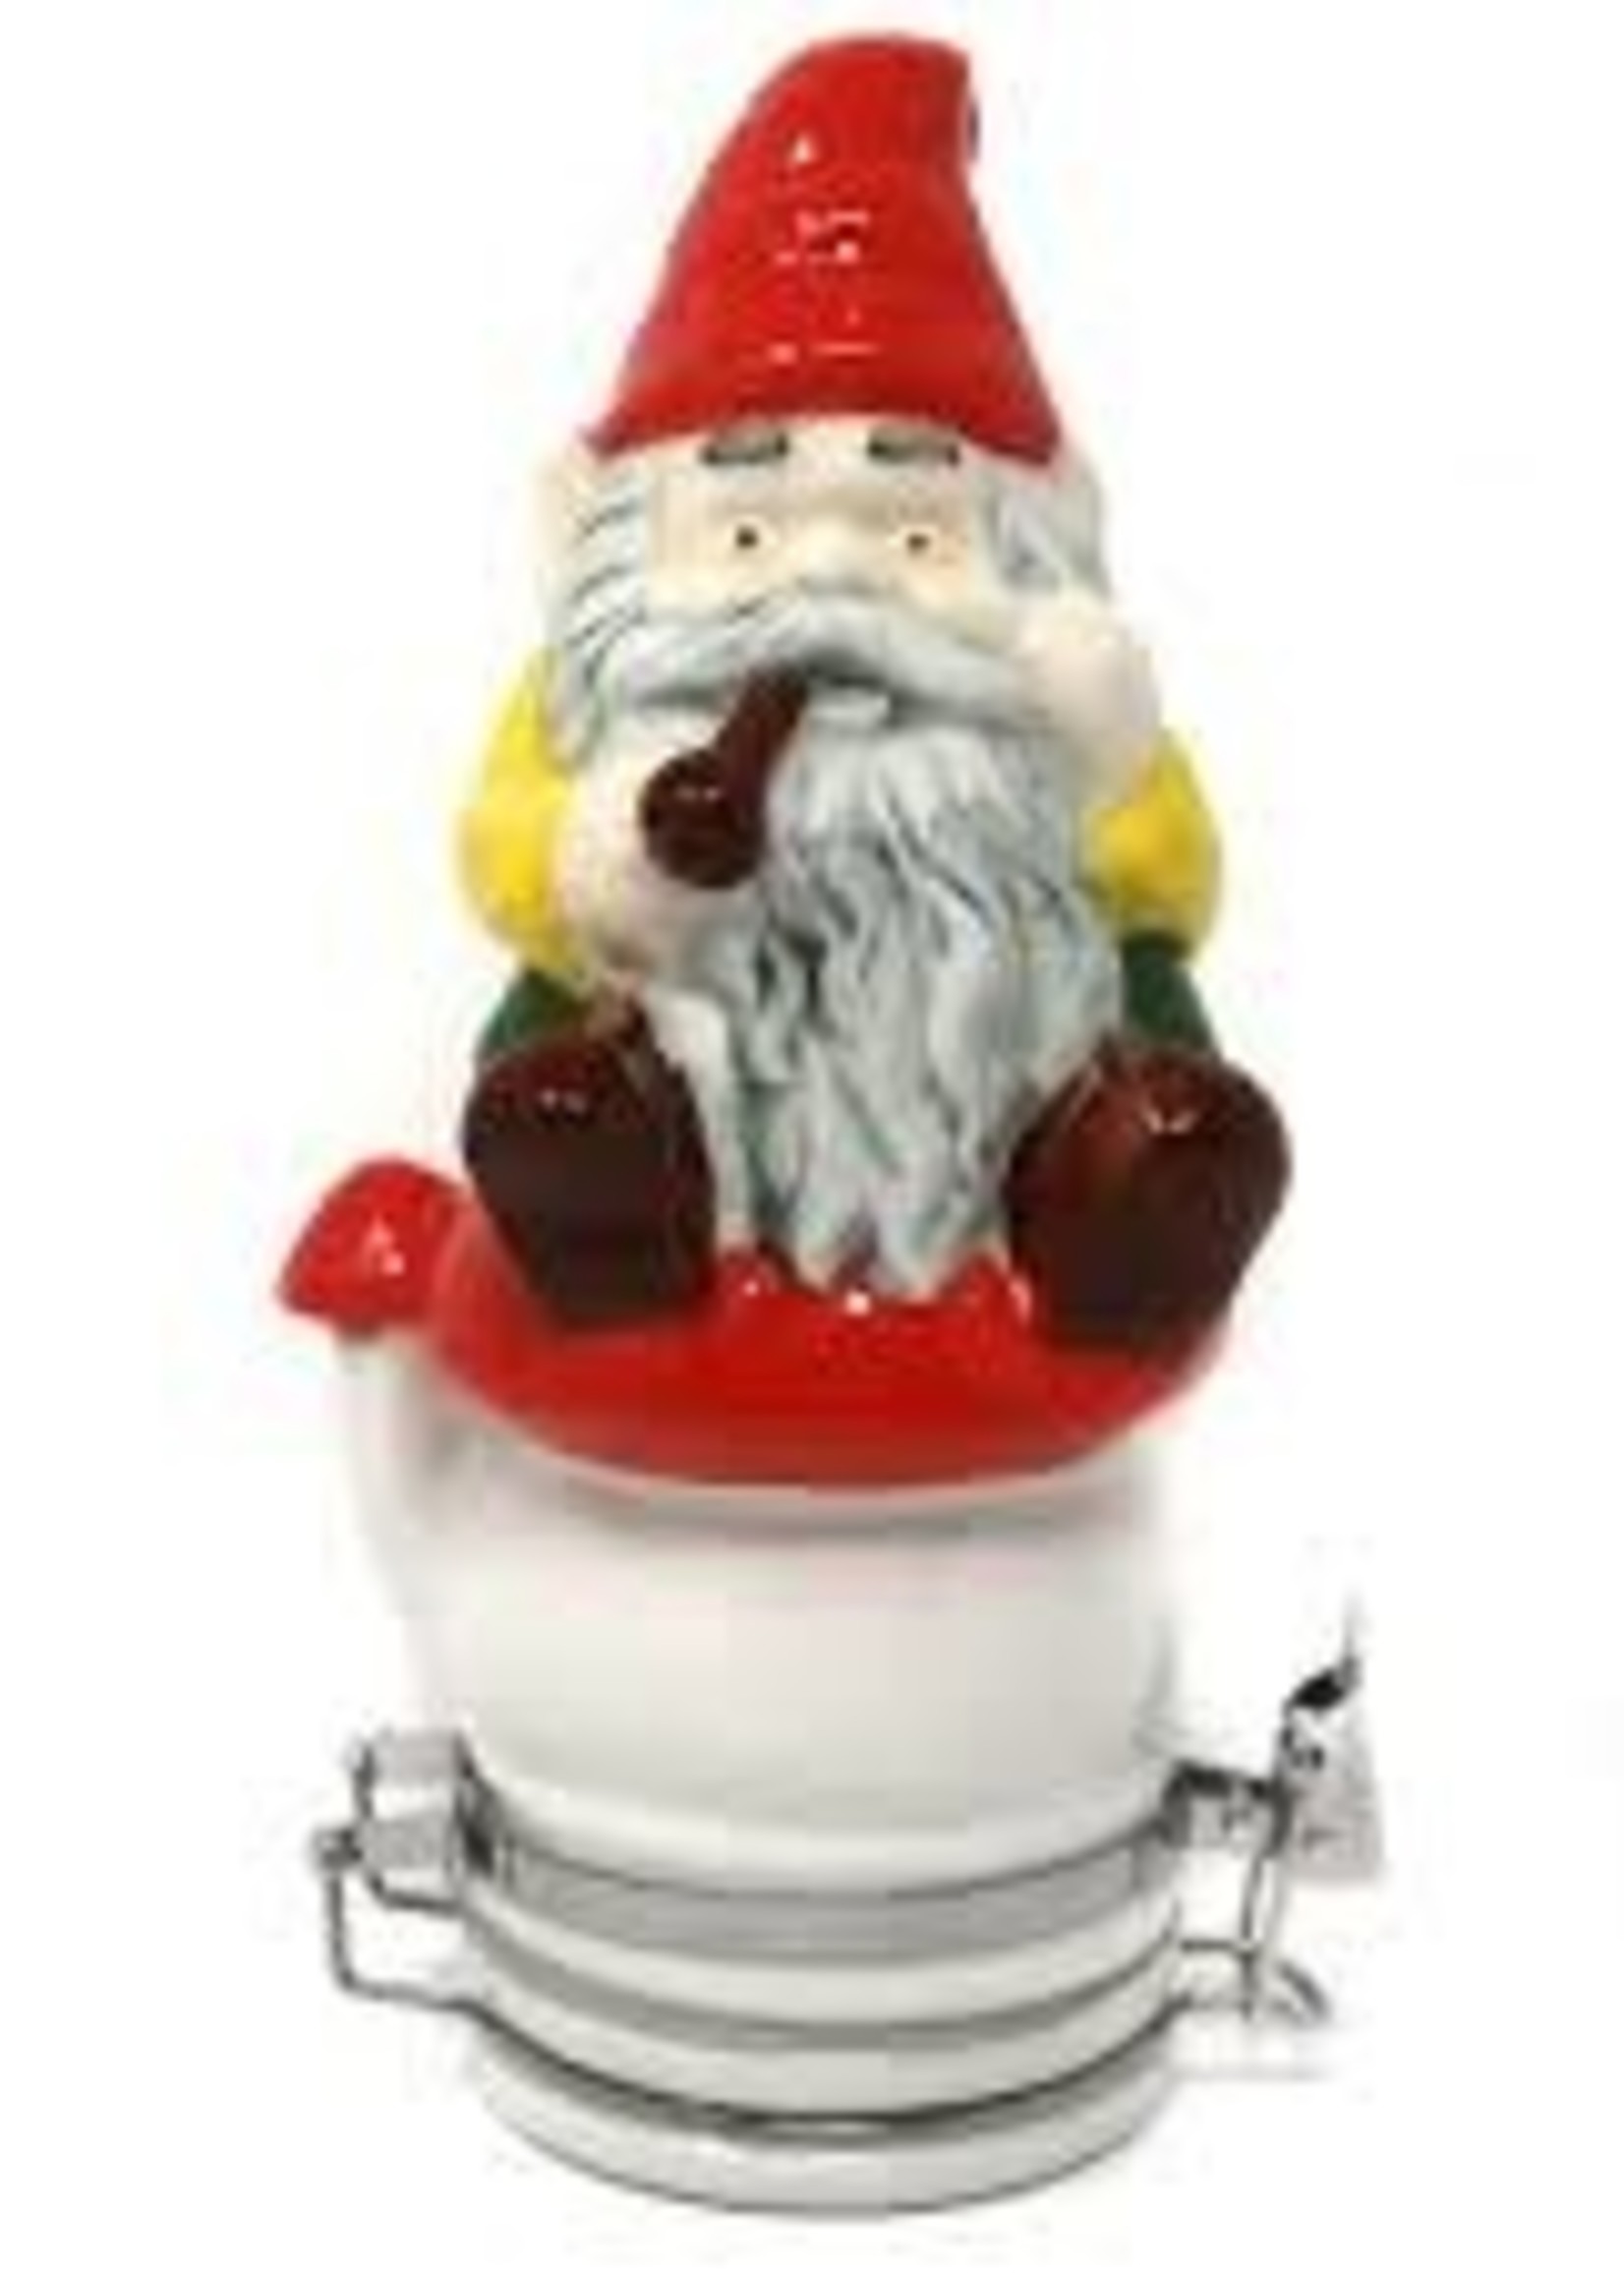 Contained Art Porcelain Jar 250ml Smoking Gnome